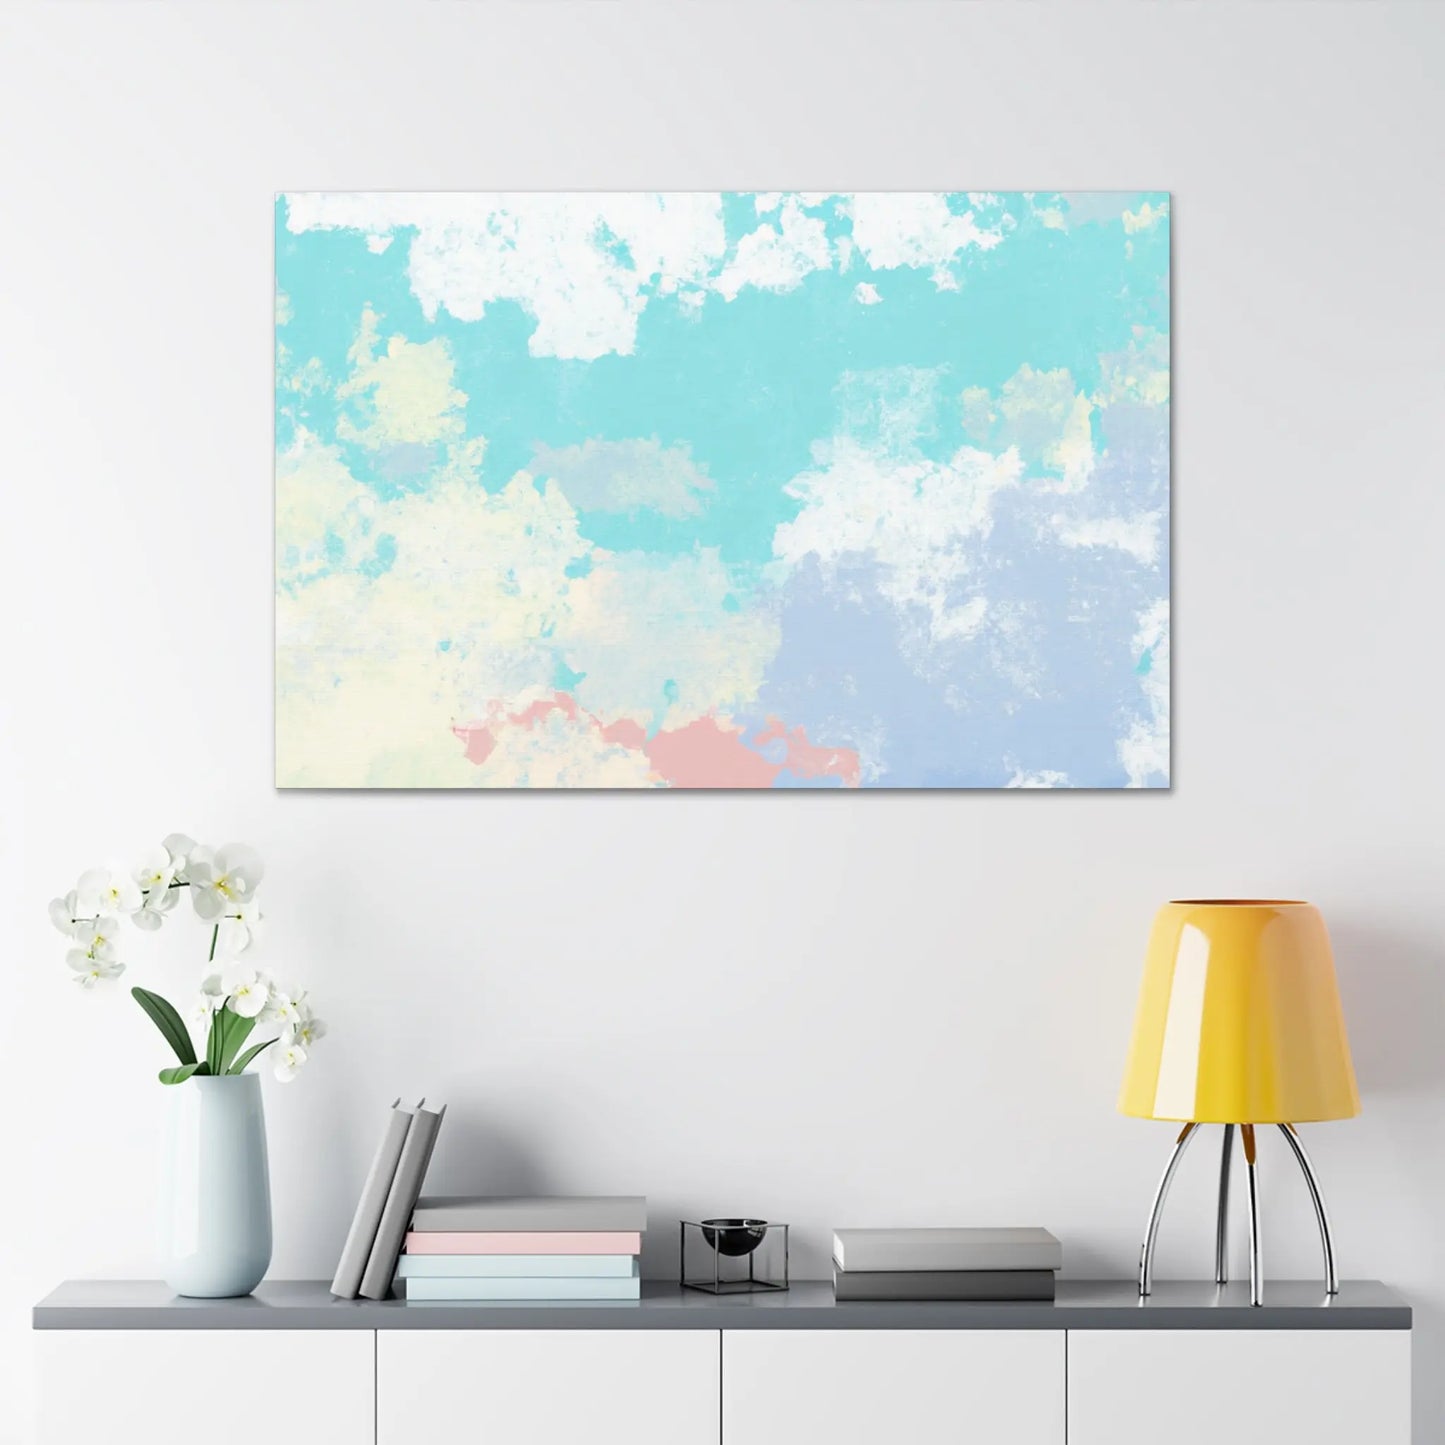 Molte Lumere (Latin for "Many Lights") - Autism Canvas Art